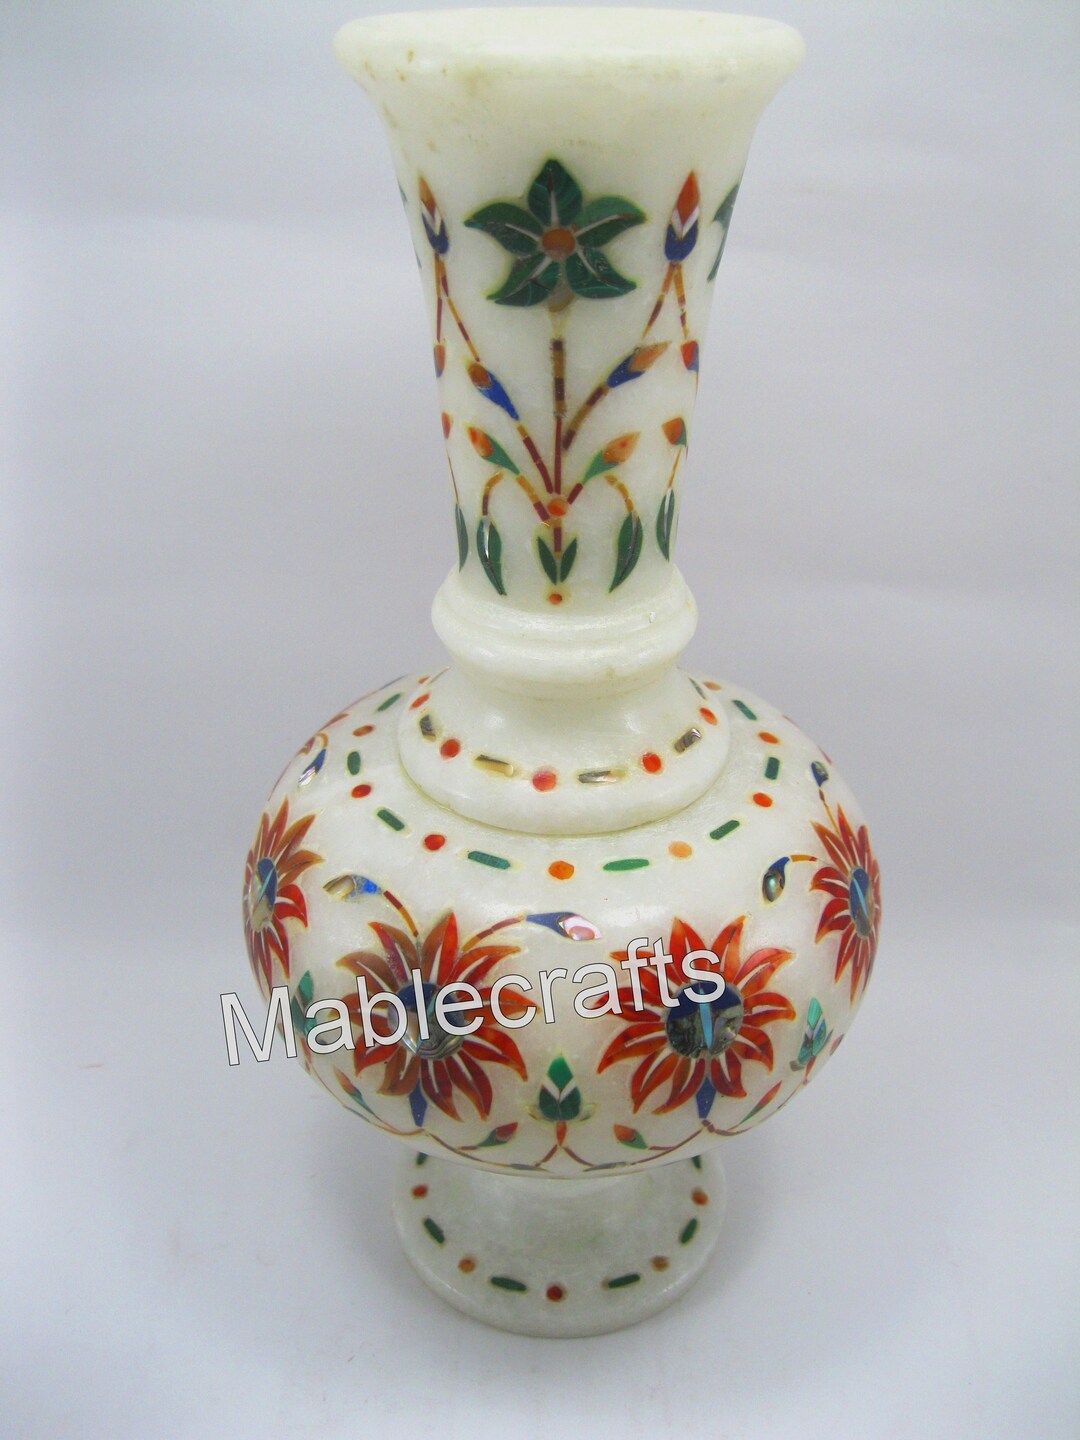 Inches Semi Precious Stones Overlay Work Flower Vase with Elegant Look  White Marble Planter from Indian Vintage Art Crafts